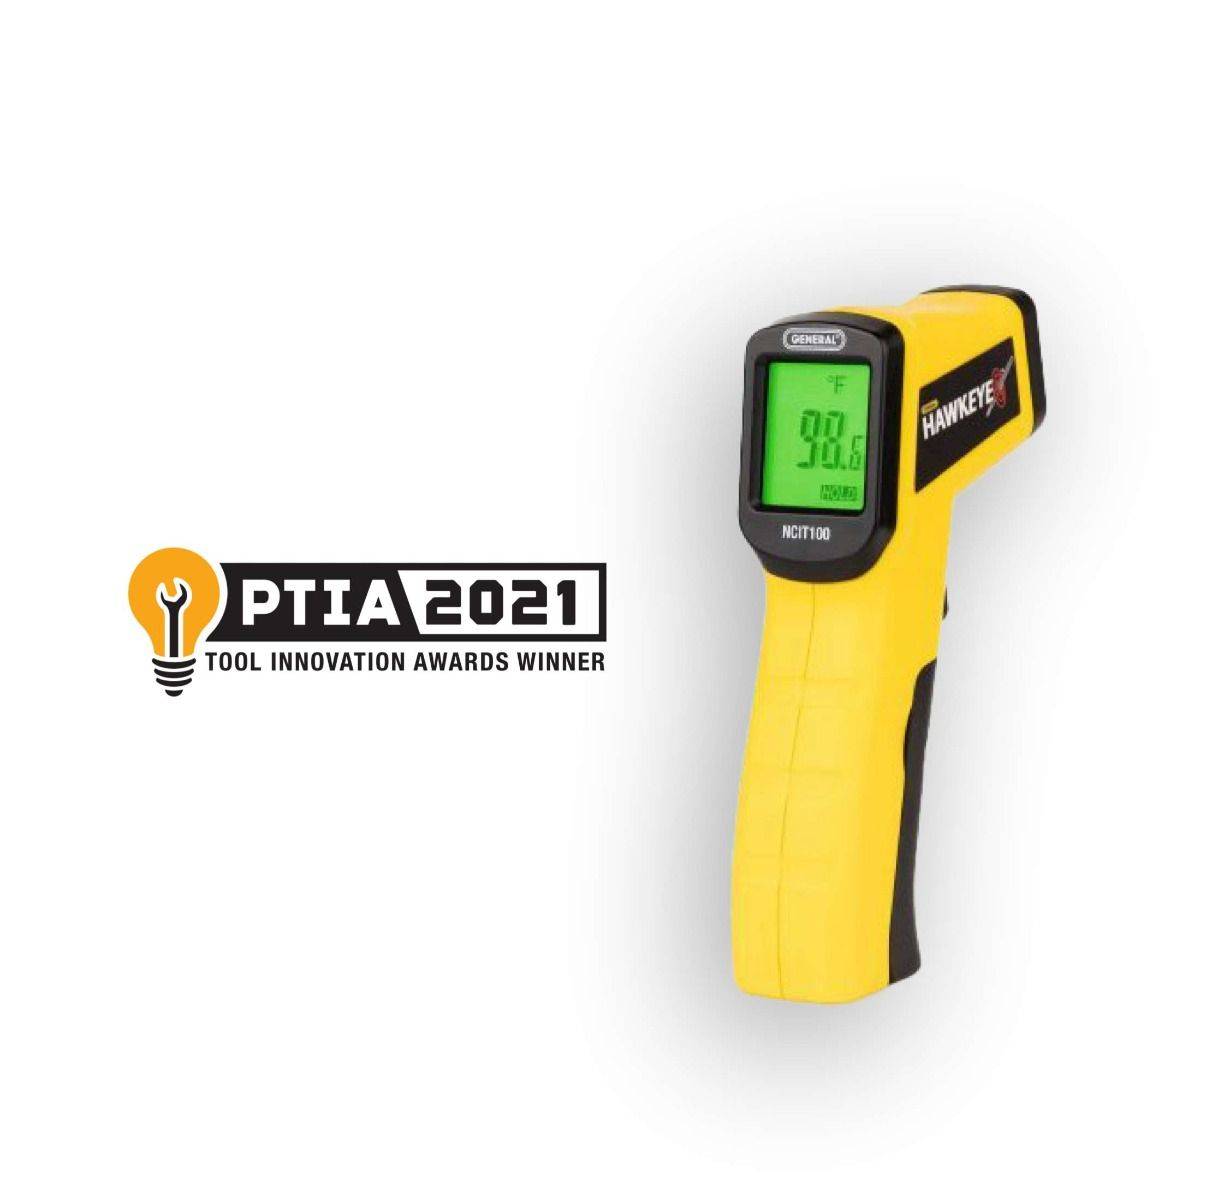 General Hawkeye Non-contact Infrared Thermometer NCIT100 for sale online 